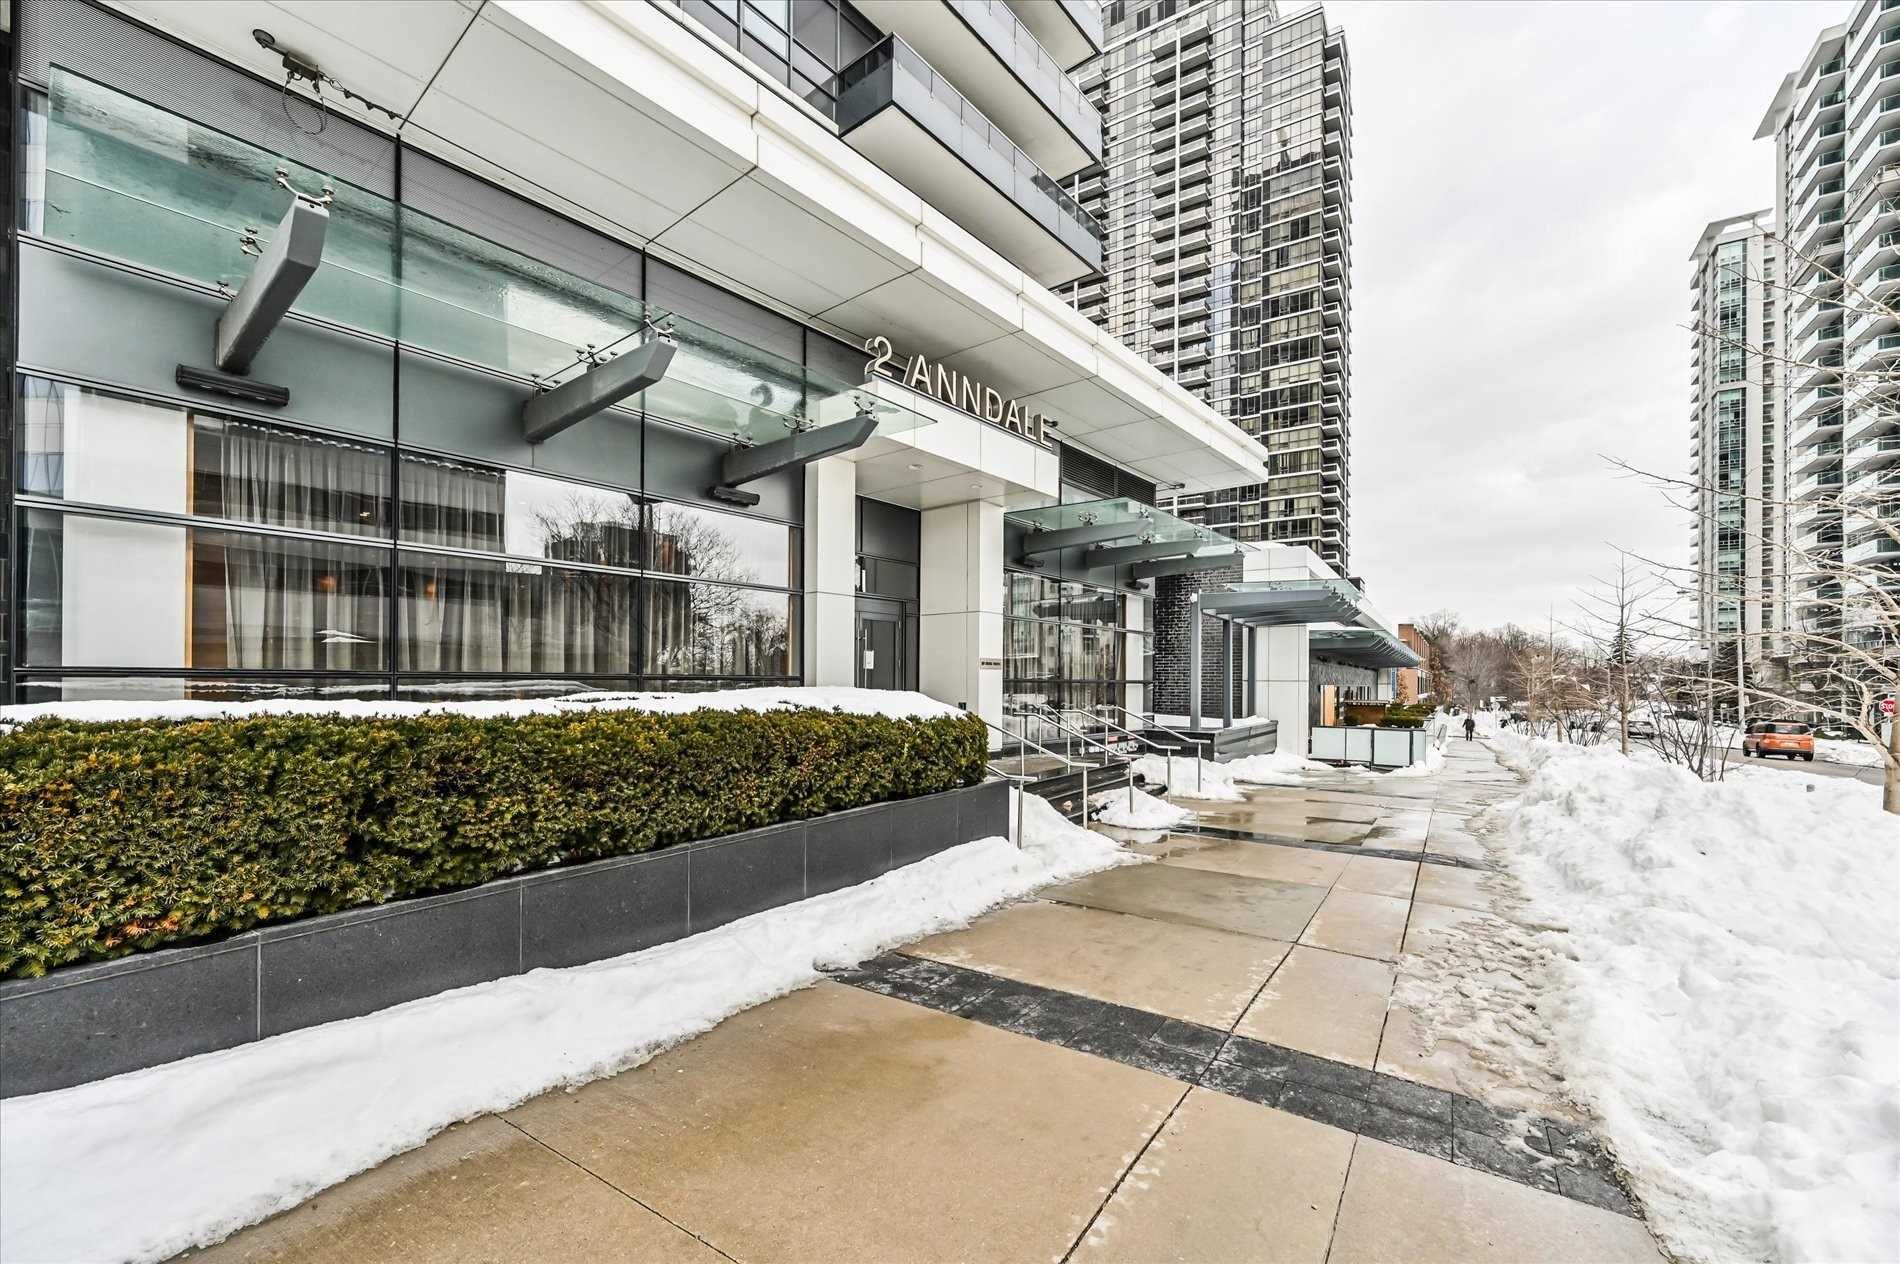 2 Anndale Dr. This condo at Hullmark Centre Condos is located in  North York, Toronto - image #2 of 2 by Strata.ca